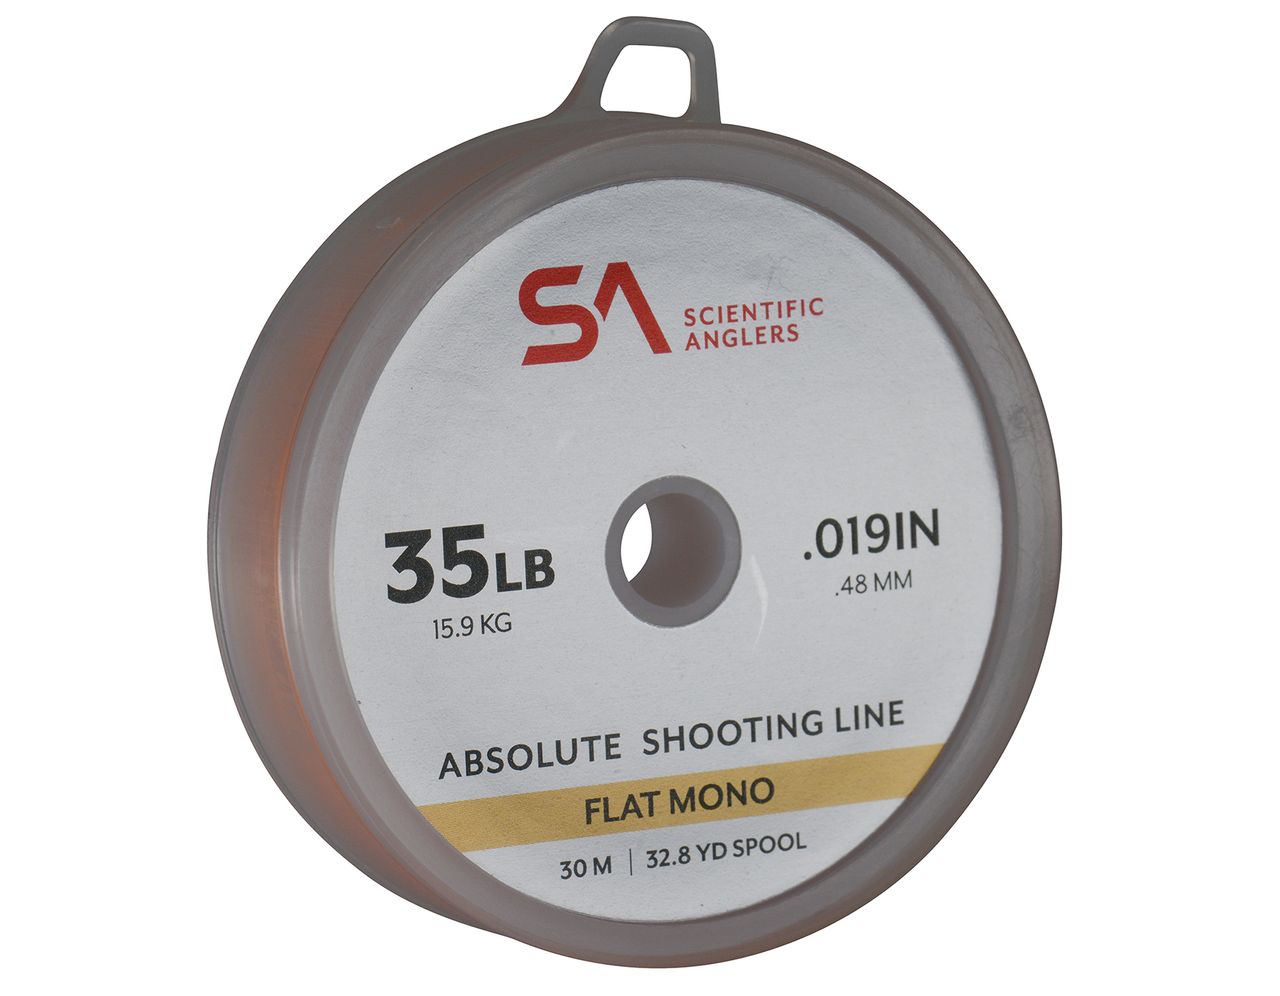 S.A. Absolute Shooting Line